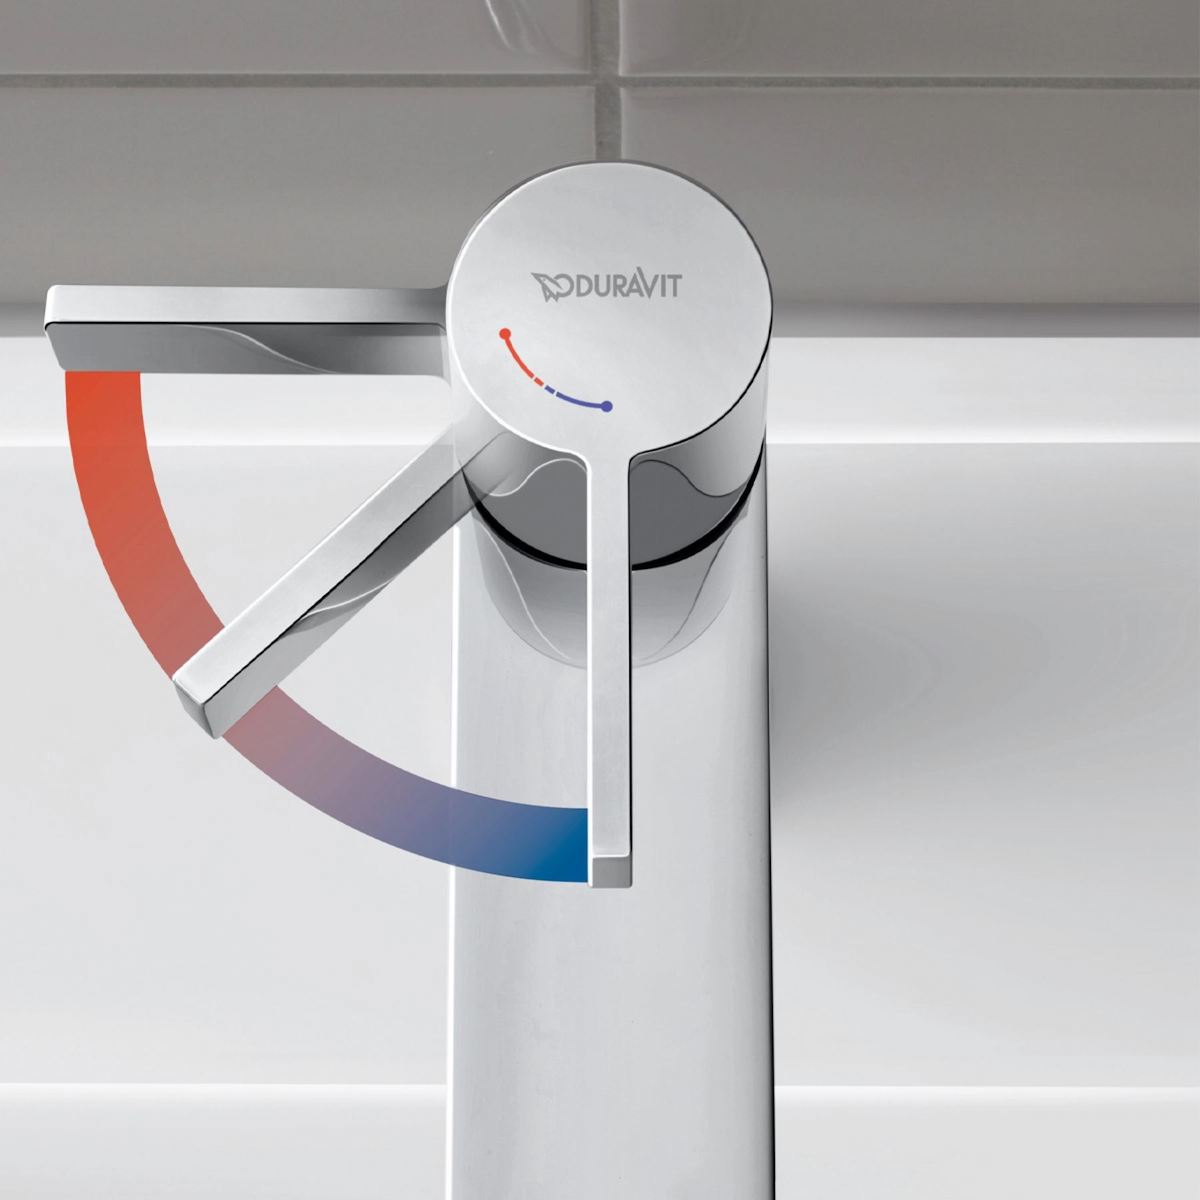 Image caption: Contemporary faucets with the FreshStart function offer potential savings because only cold water flows in the central position. Only when the handle is deliberately moved to the left is hot water added to the mix. The Duravit AG single-lever mixers ensure sparing use of energy and resources.